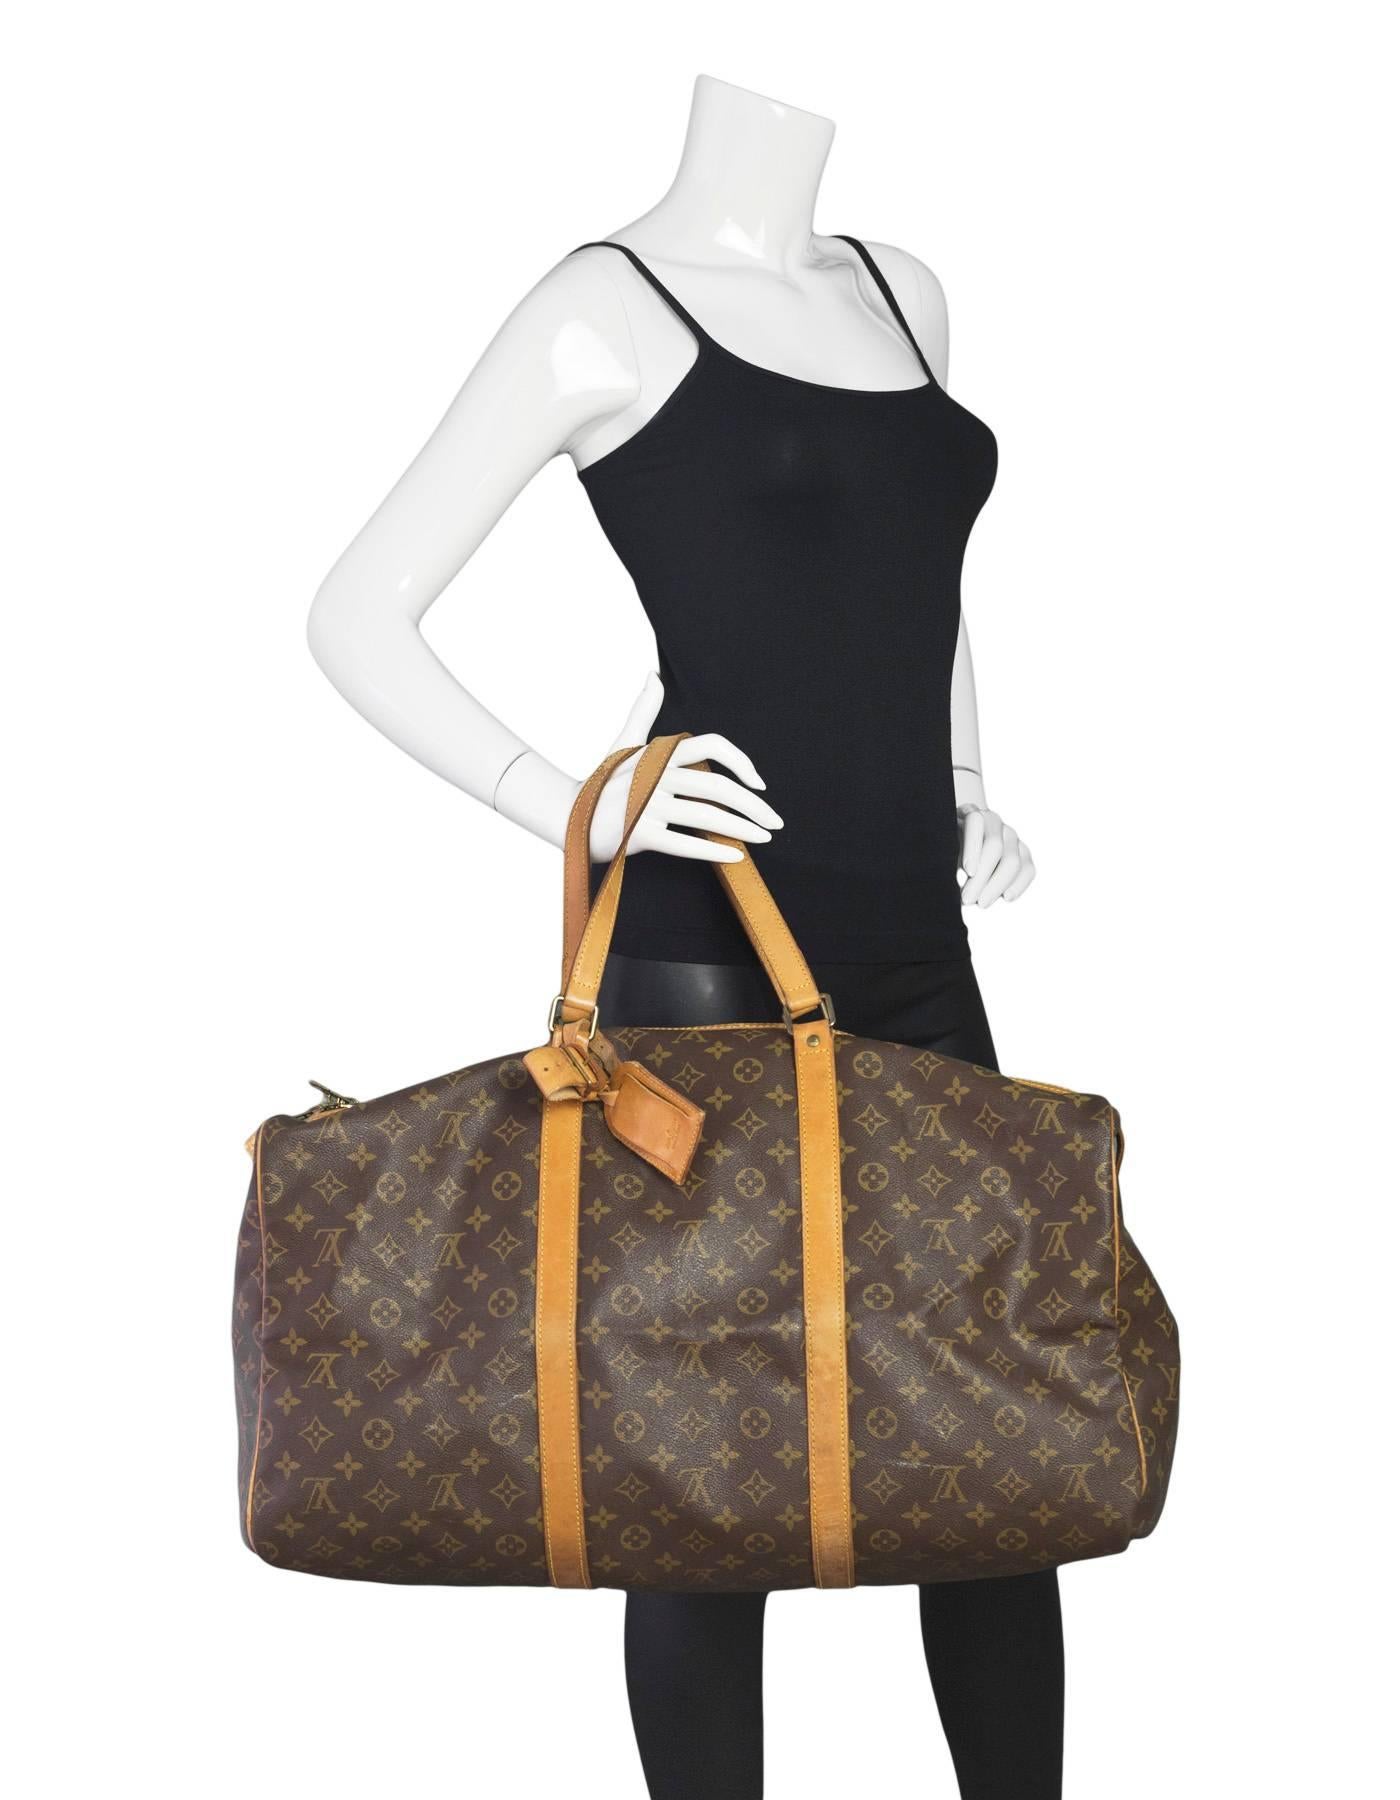 Louis Vuitton Vintage Monogram Keepall 55

Made In: France
Year of Production: Vintage - pre 1980
Color: Brown and tan
Hardware: Goldtone
Materials: Coated canvas and vachetta leather
Lining: Brown canvas
Closure/Opening: Double zip across